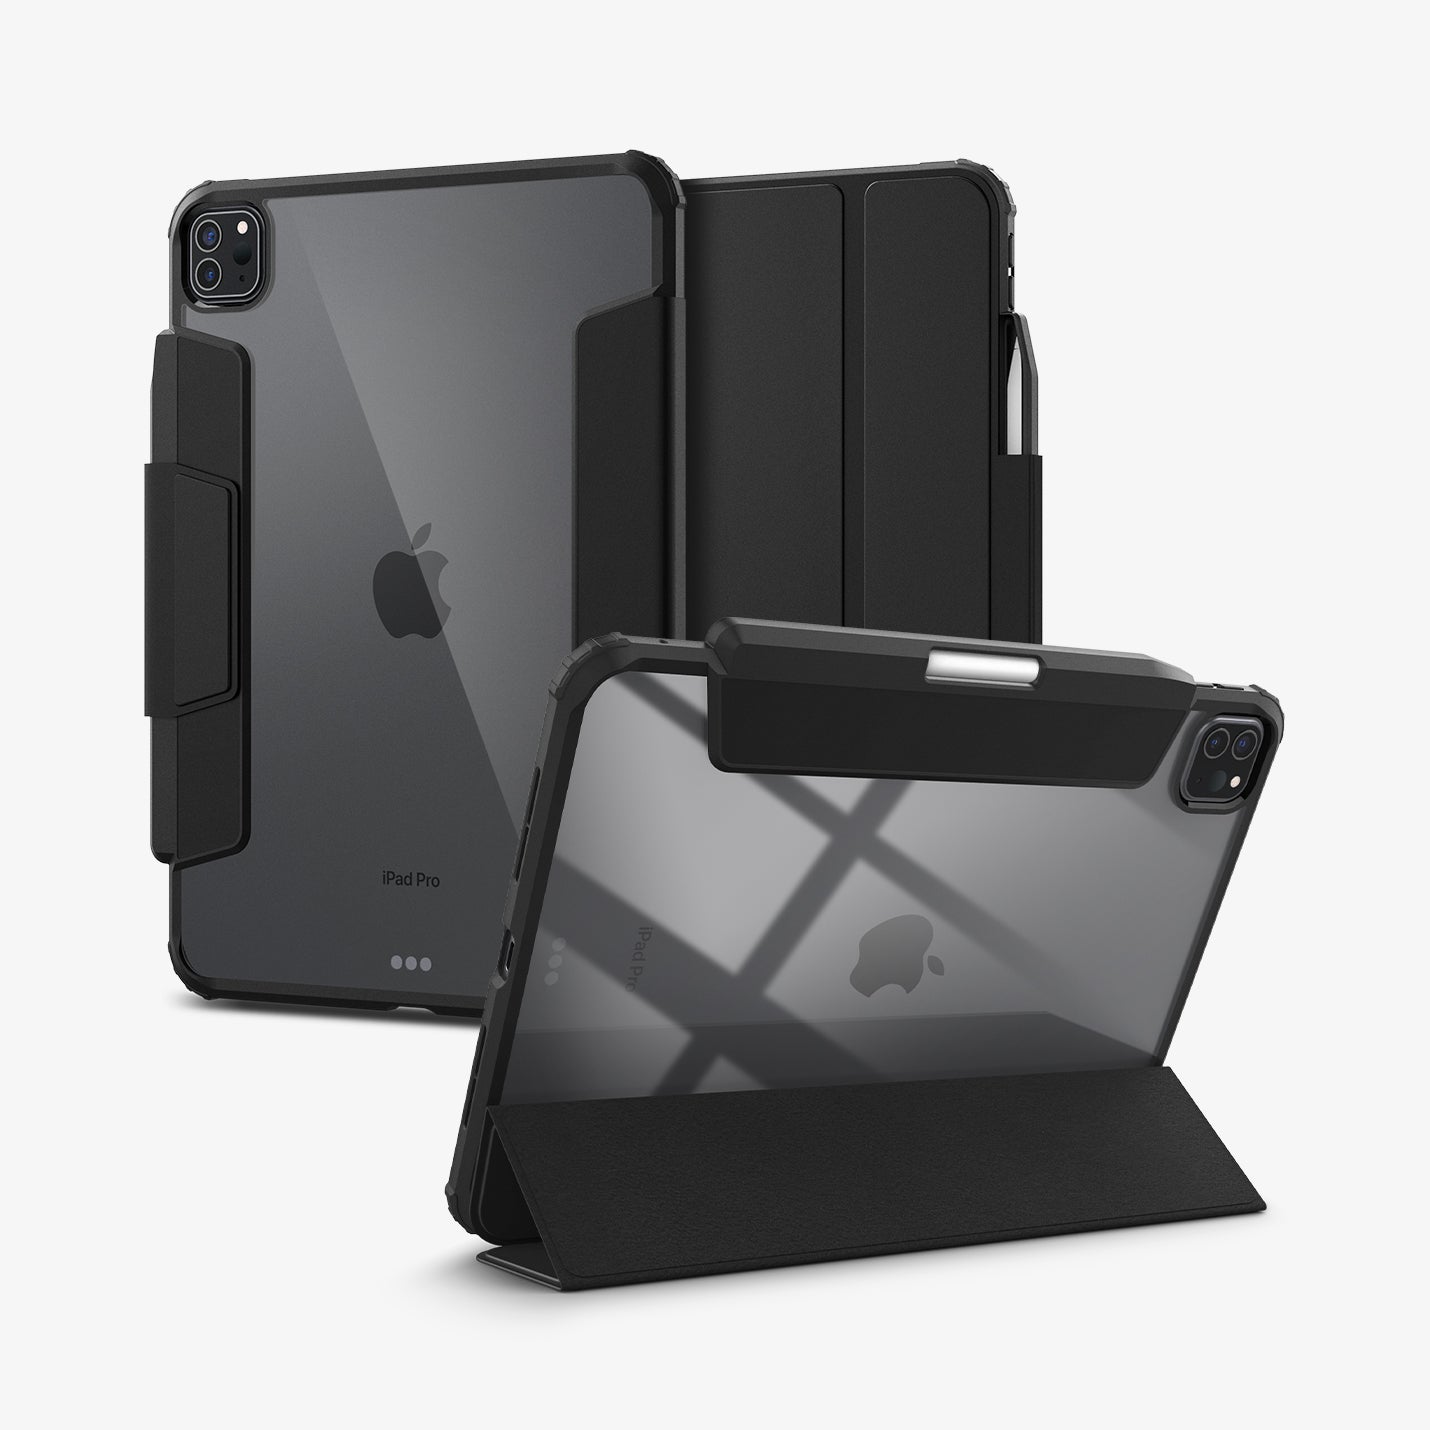 ACS07016 - iPad Pro 11-inch Case Ultra Hybrid Pro in Black showing the back with a folded front cover propped up as a stand, behind it, a device showing back and partial front